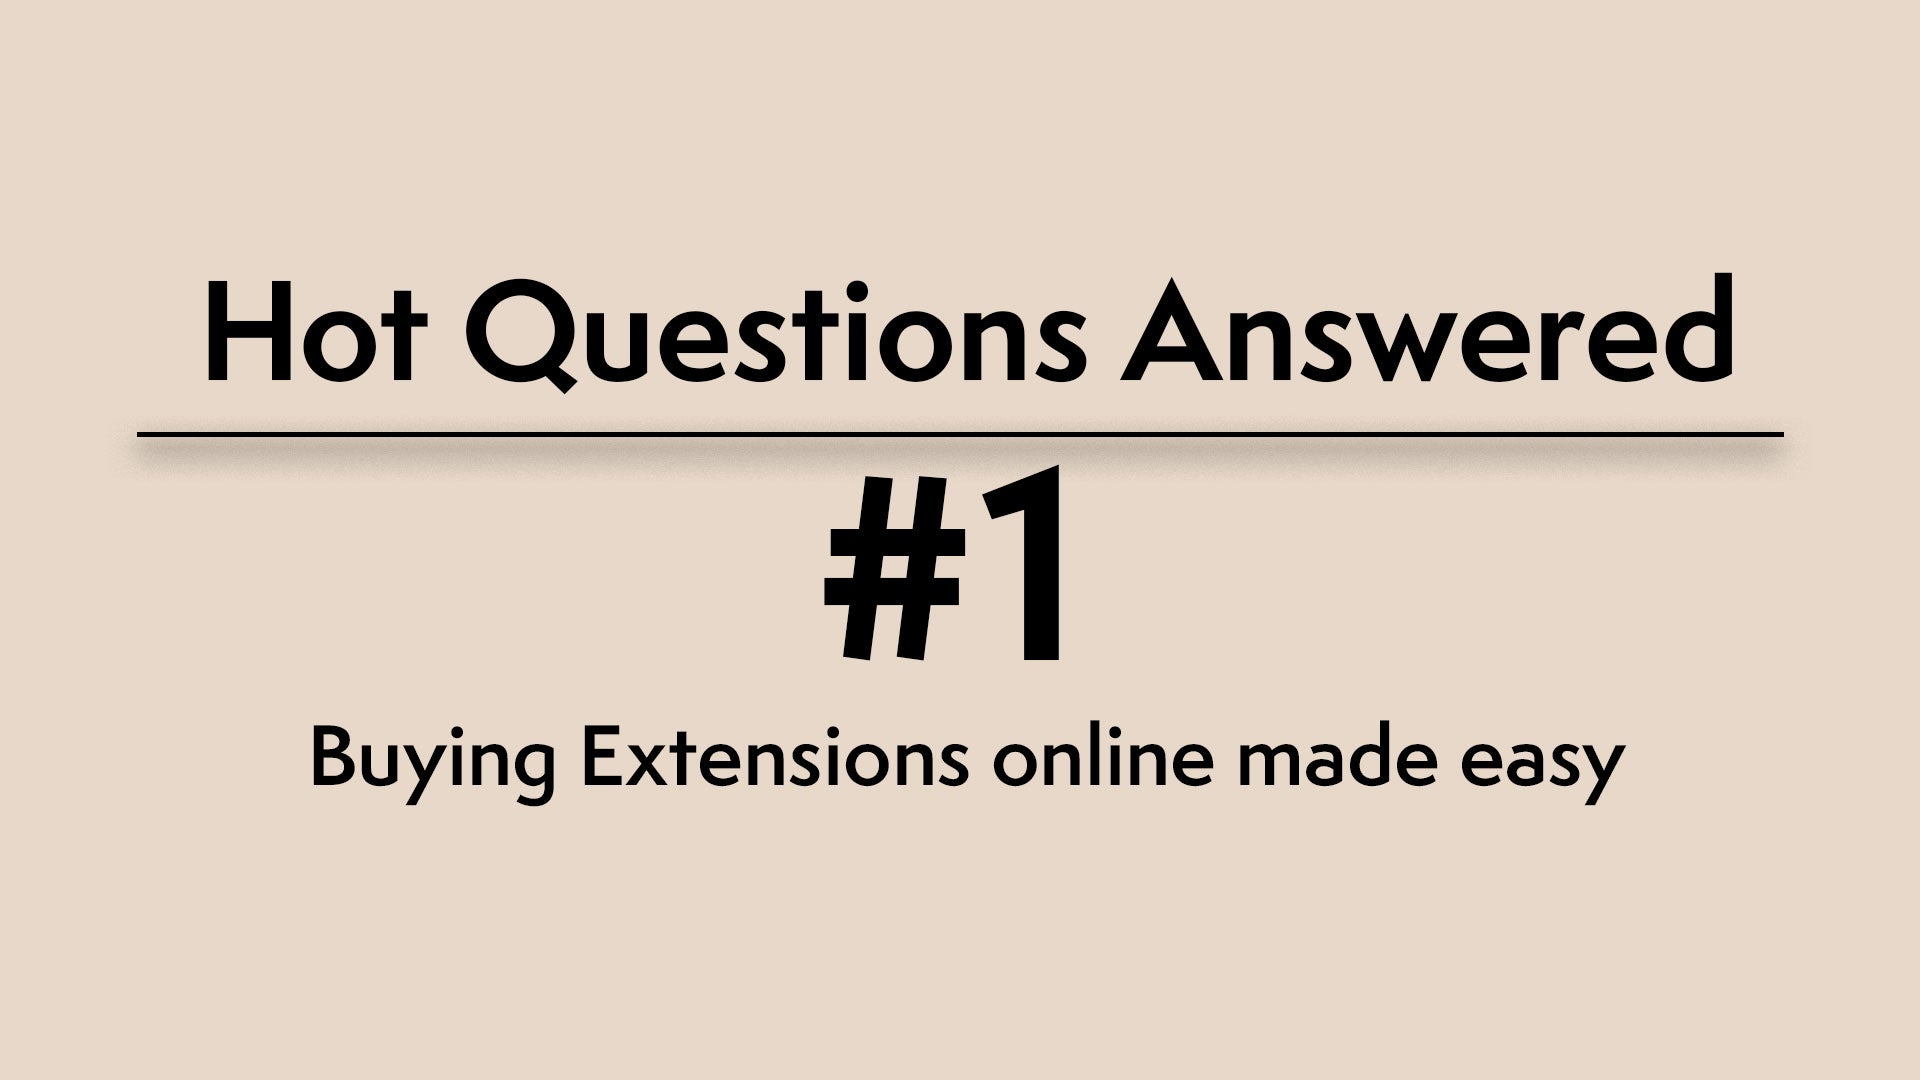 Hot Questions Answered #1: Buying Extensions online made easy